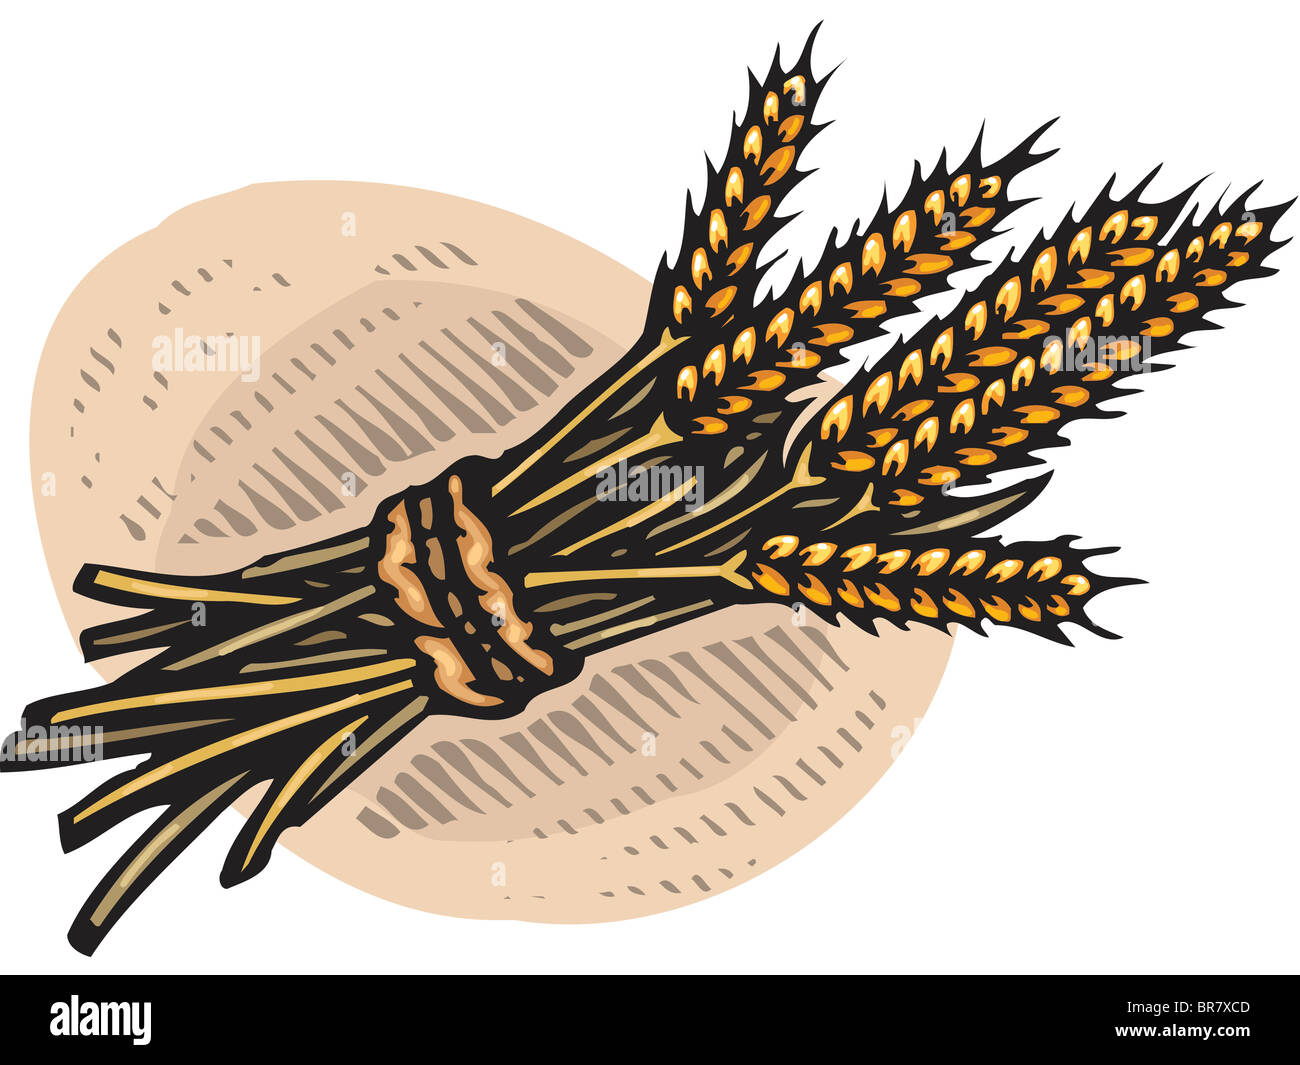 An illustration of a bundle of wheat Stock Photo